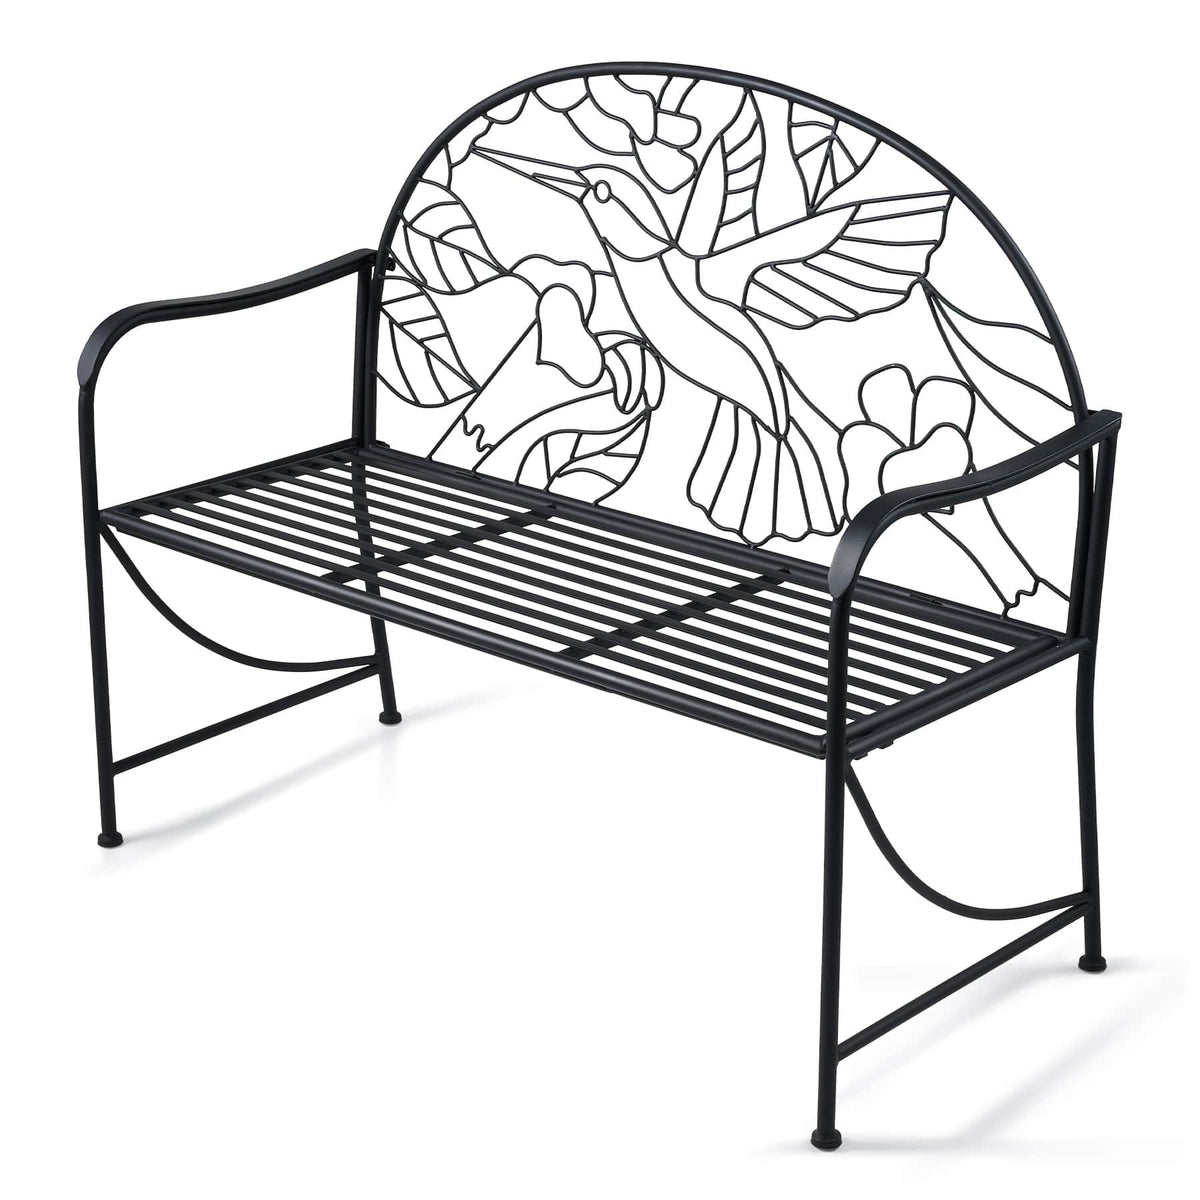 park bench drawing front view